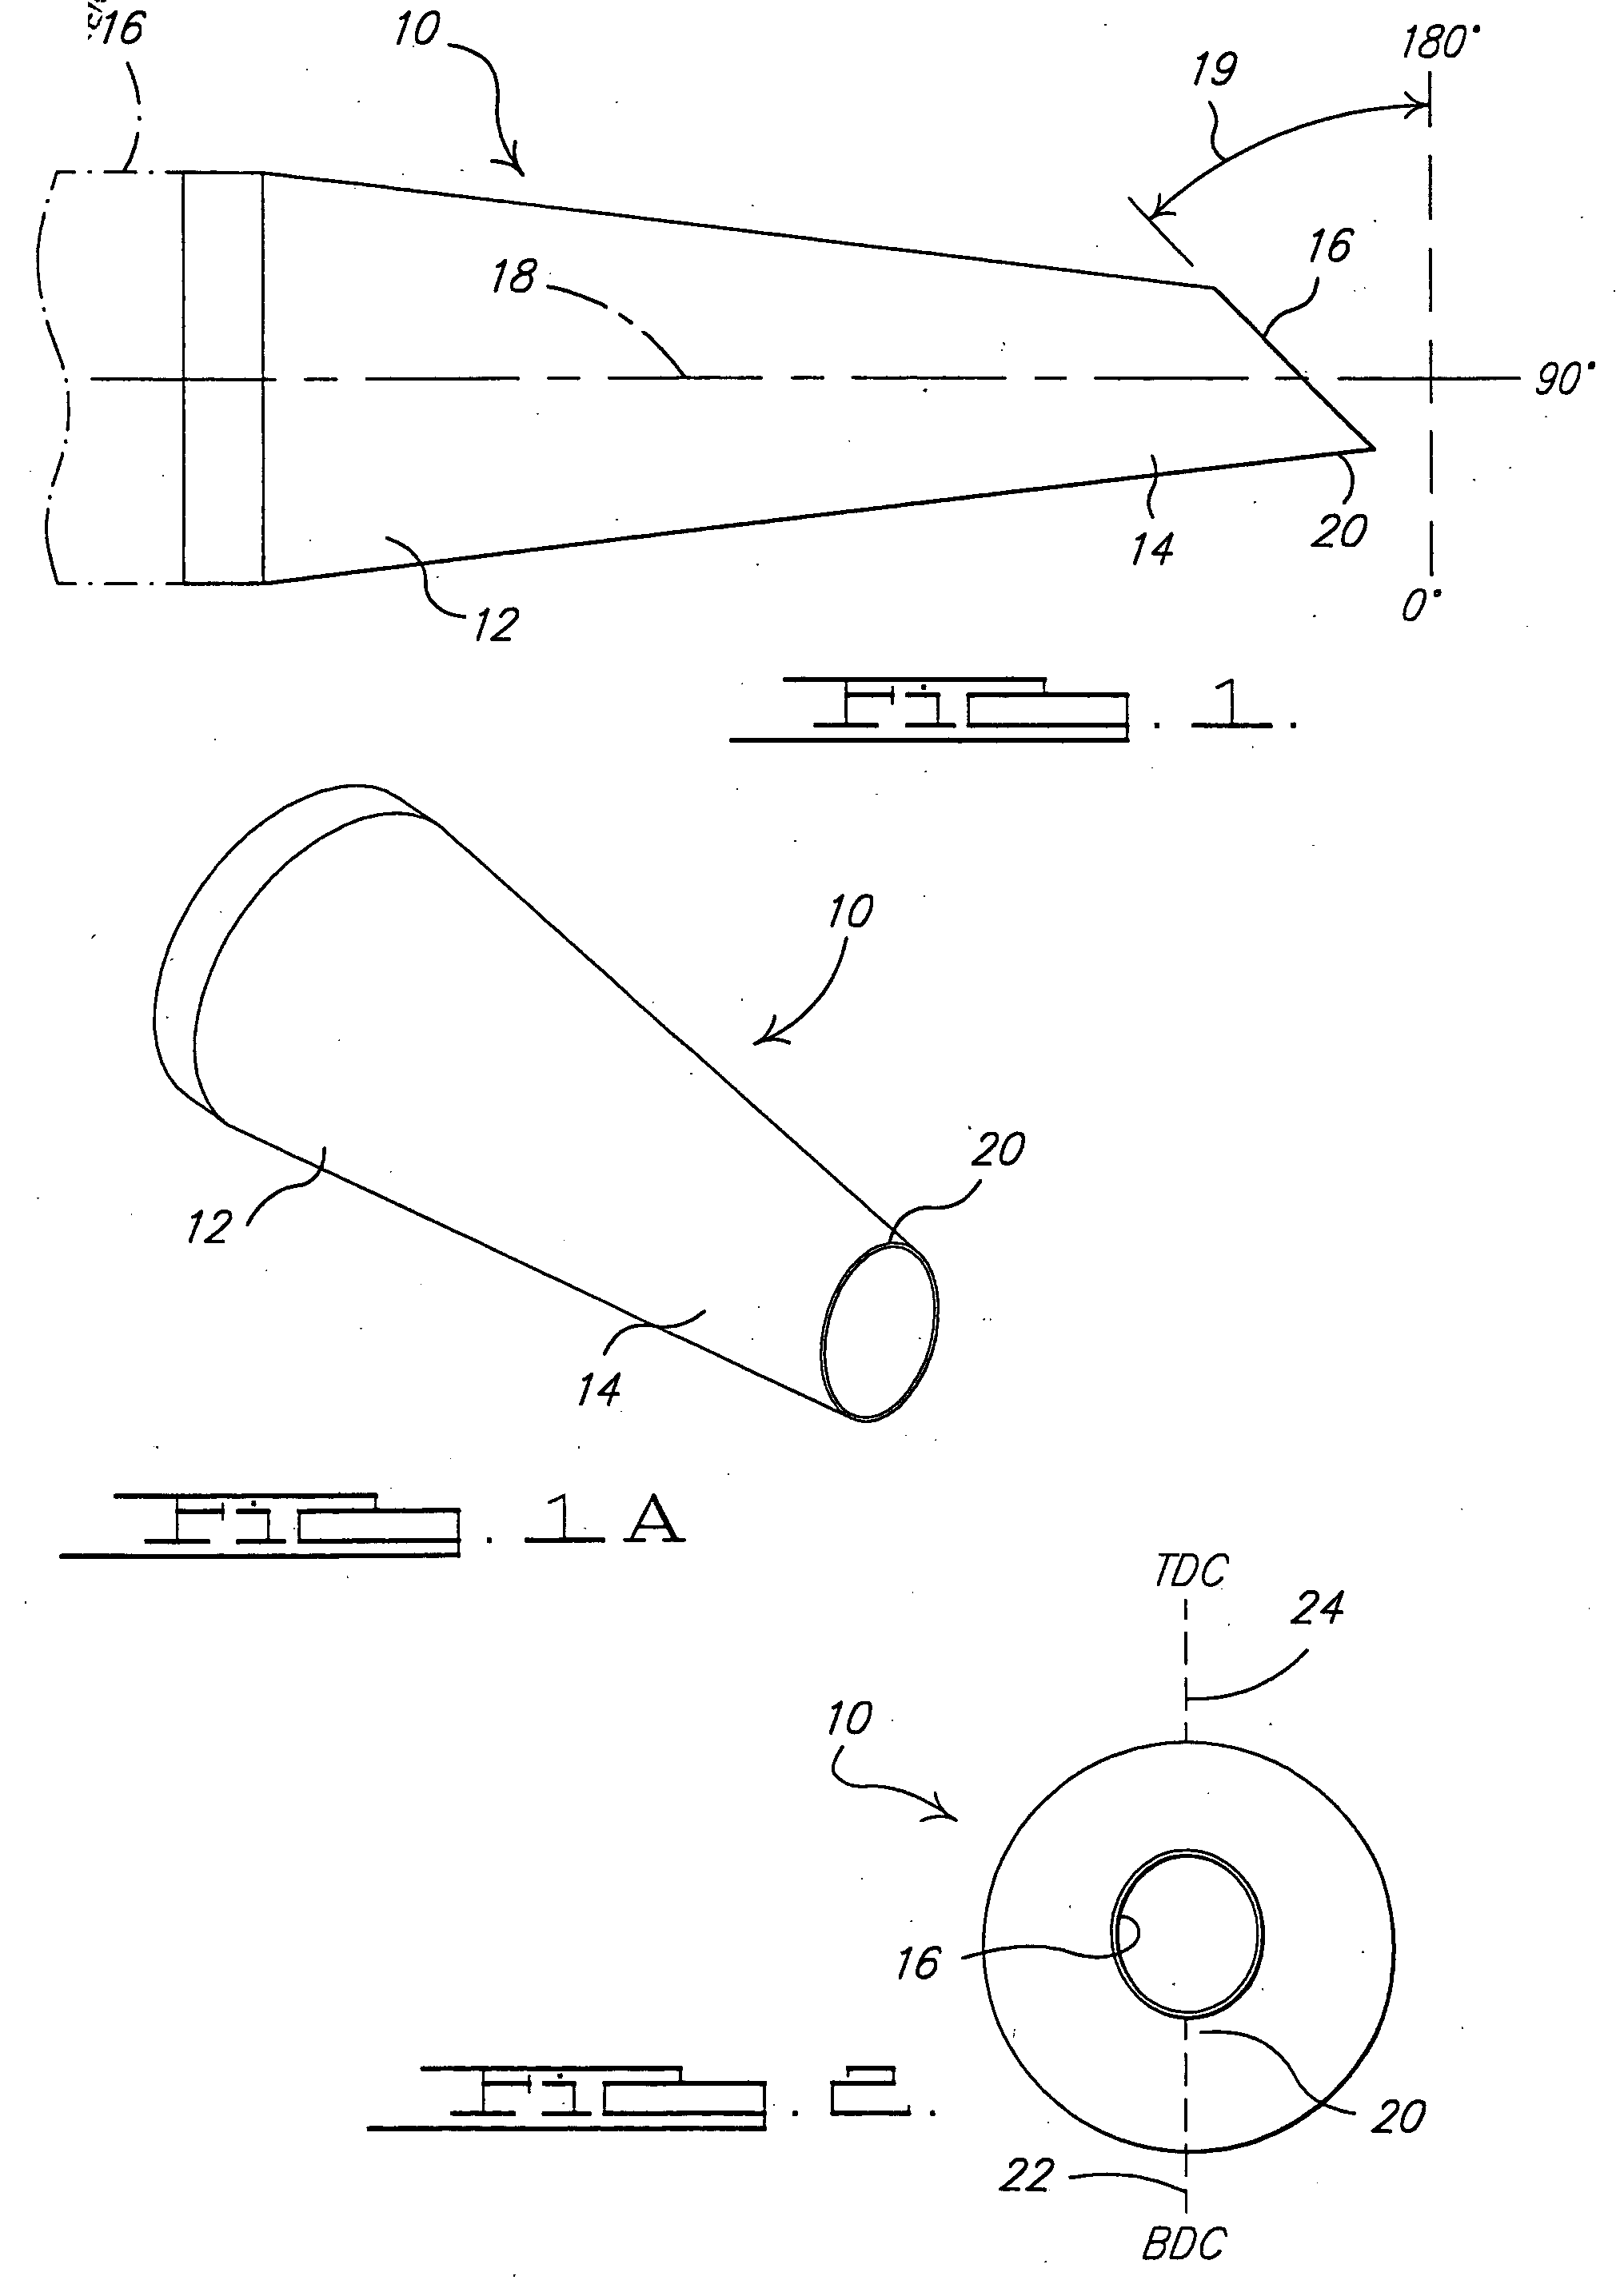 Apparatus and method for reduction jet noise from single jets